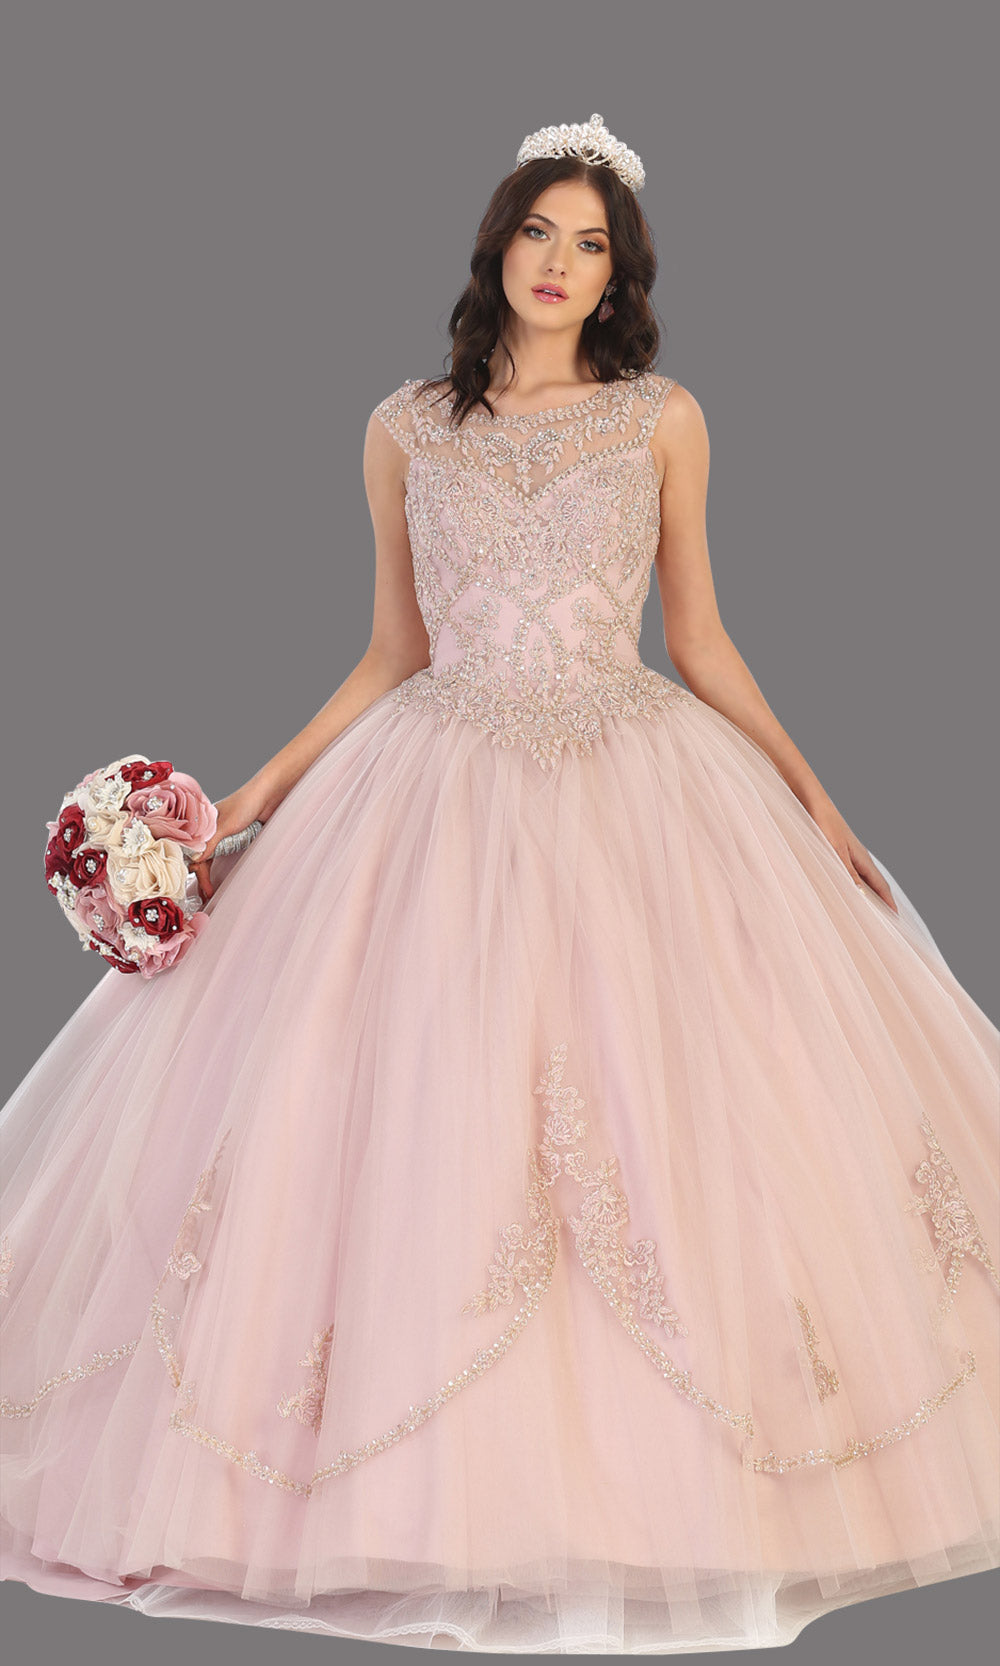 Mayqueen LK130 mauve quinceanera high neck ball gown w/sequin detail. Dusty rose ball gown is perfect for engagement dress, wedding reception, indowestern party gown, sweet 16, debut, sweet 15, sweet 18. Plus sizes available for ballgowns.jpg